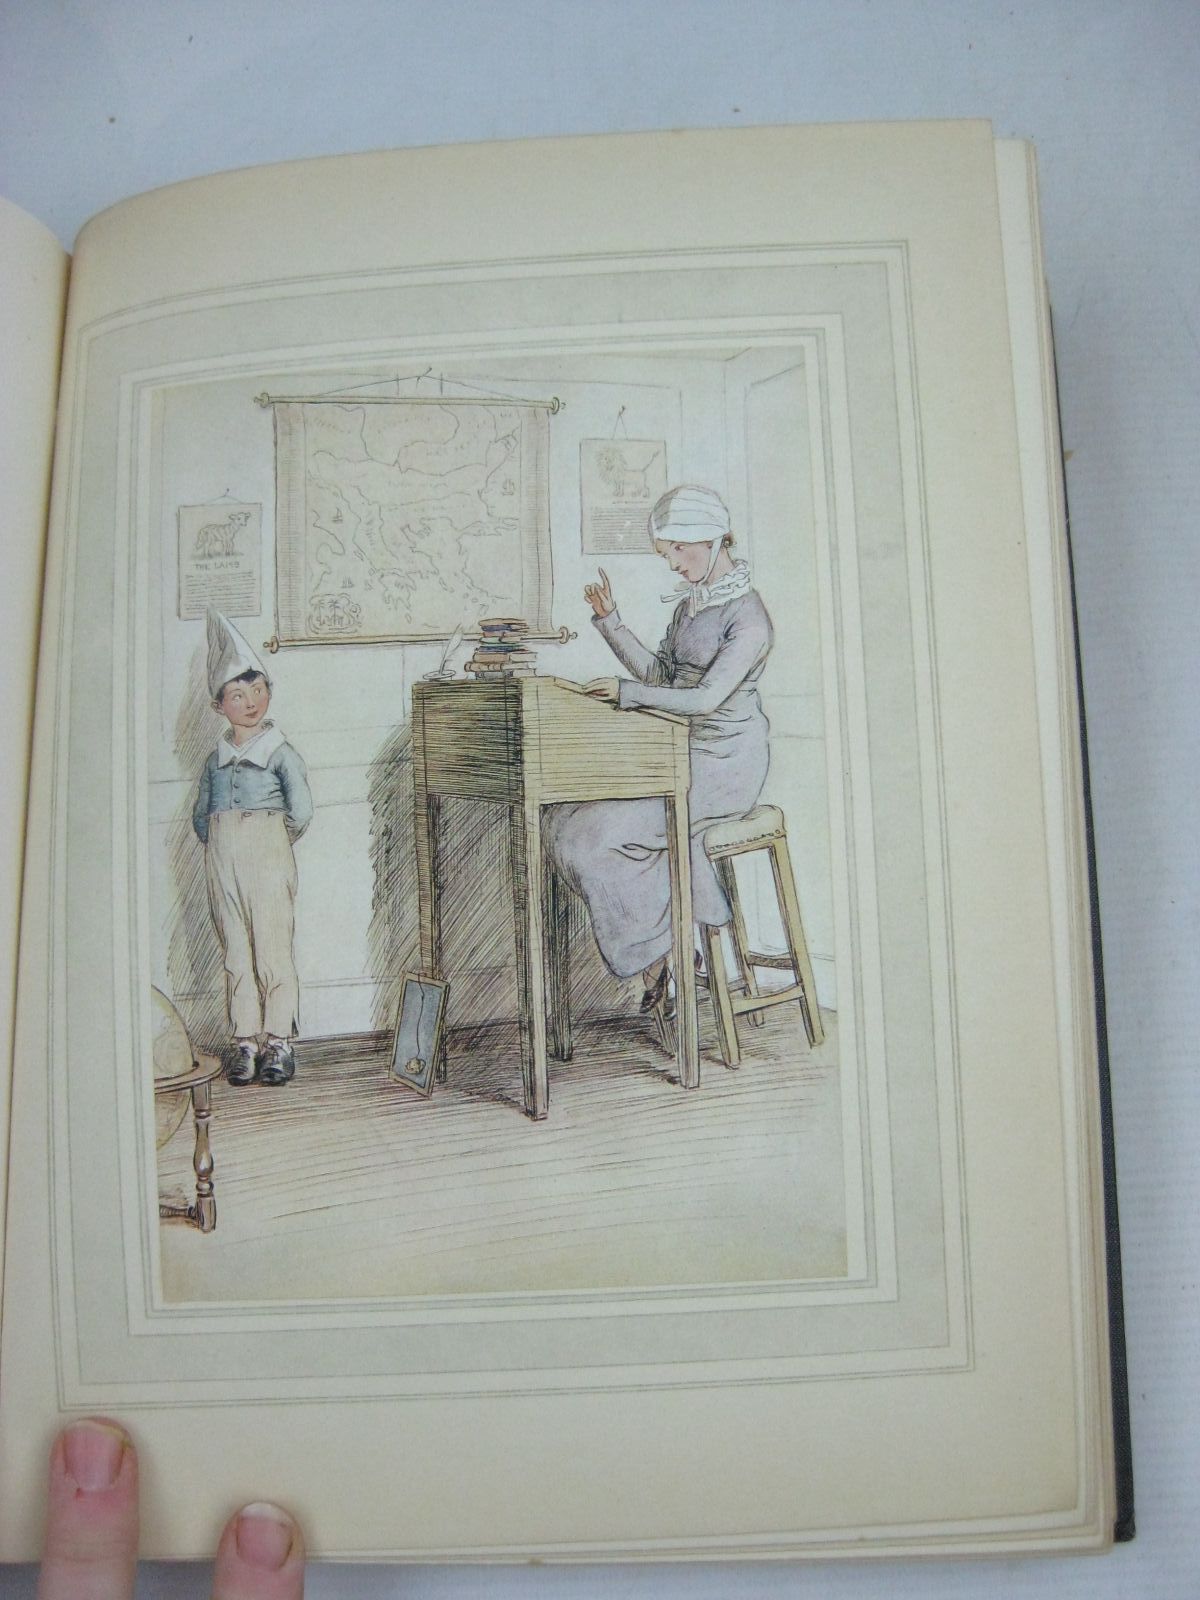 Photo of QUALITY STREET written by Barrie, J.M. illustrated by Thomson, Hugh published by Hodder & Stoughton (STOCK CODE: 1505881)  for sale by Stella & Rose's Books